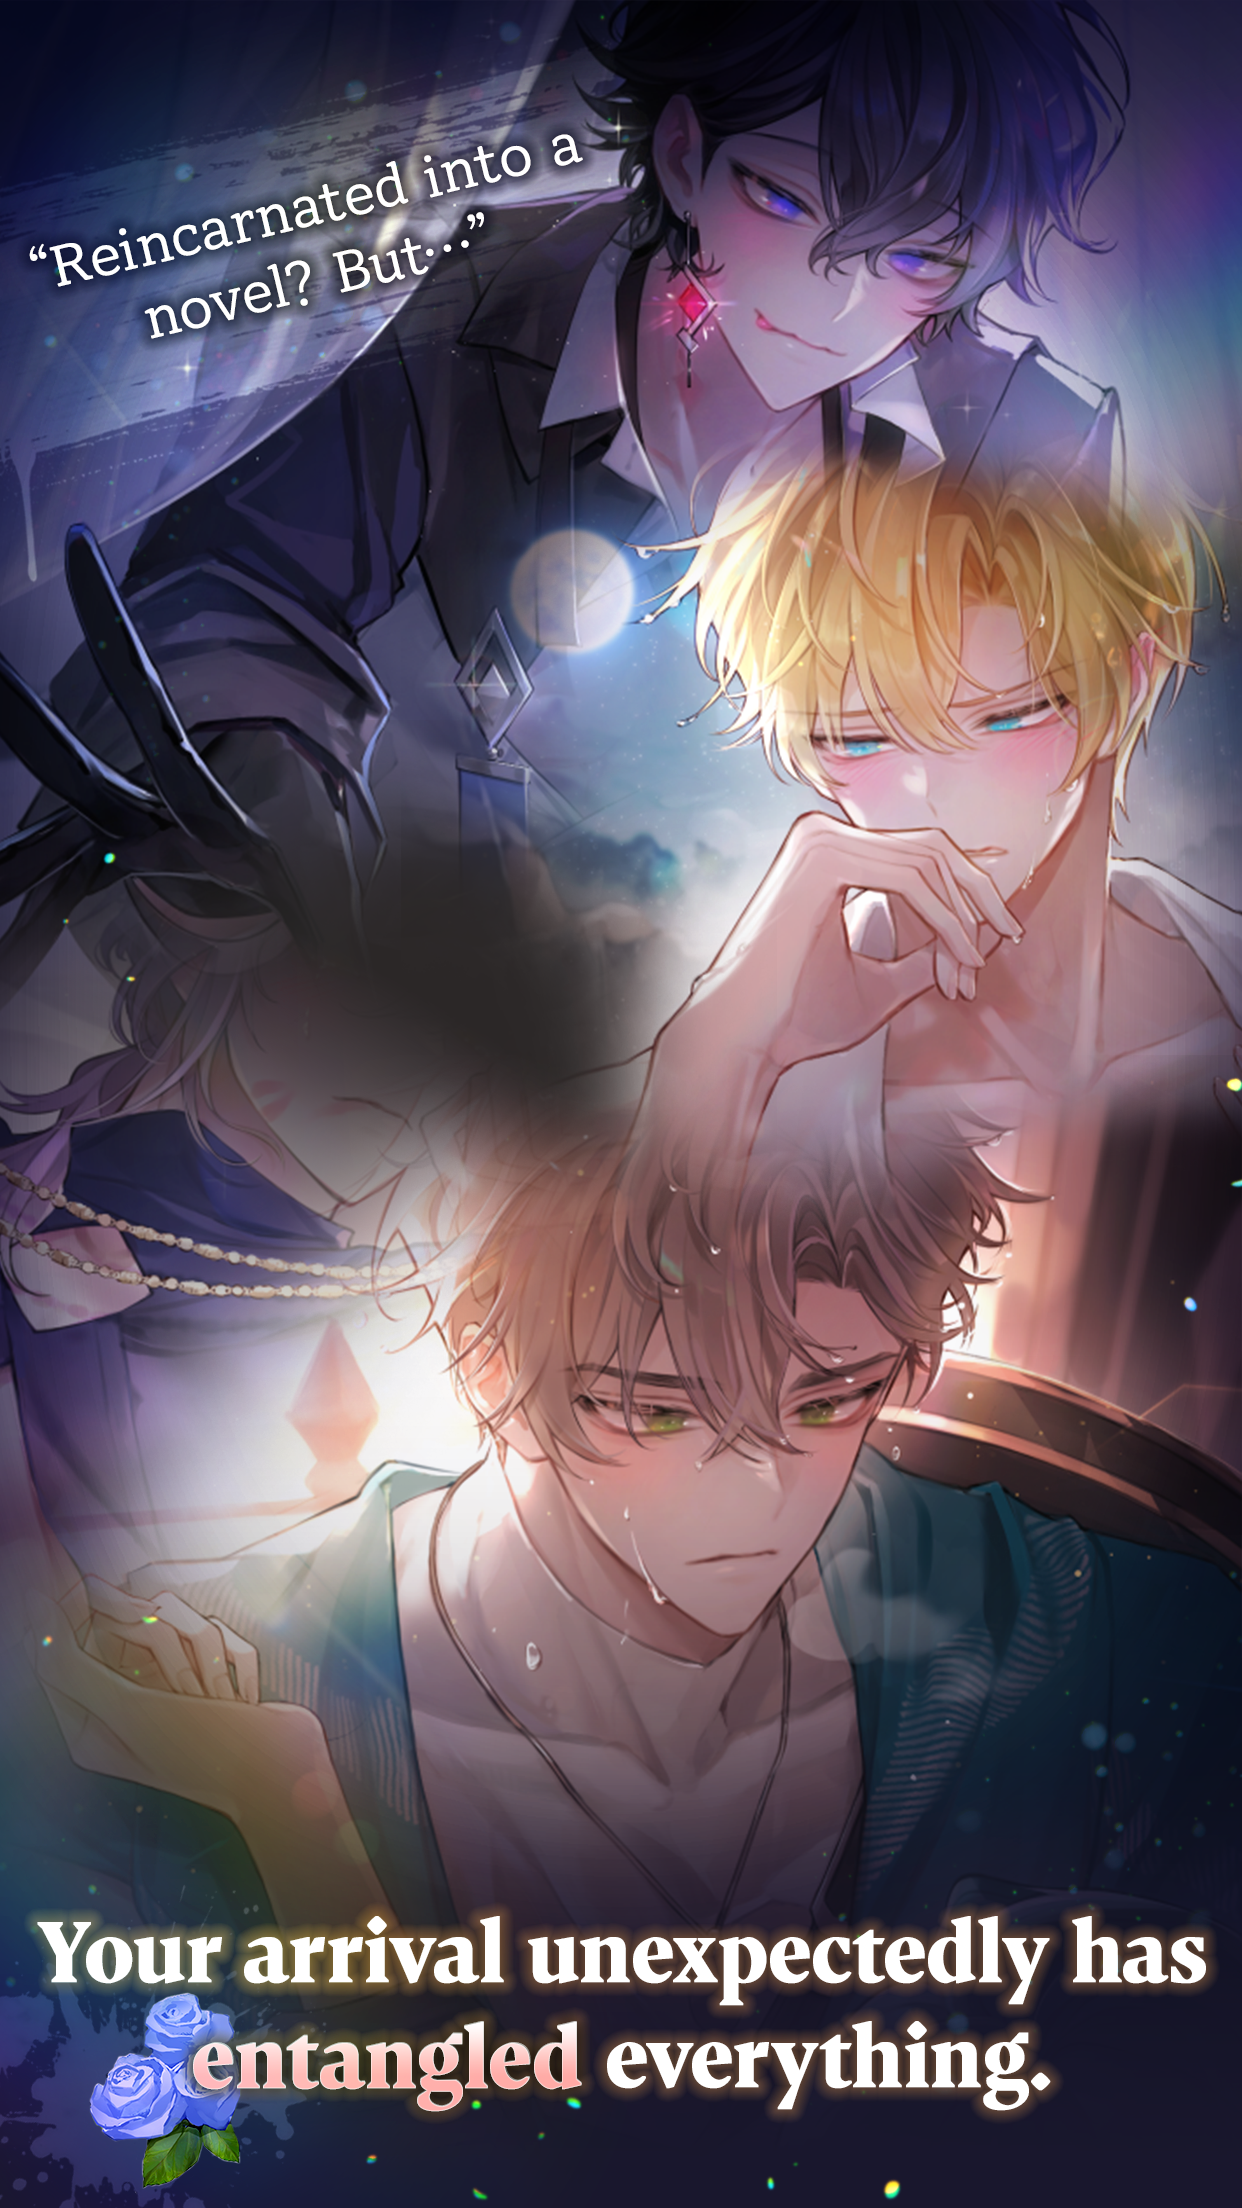 Secret Kiss with Knight: Otome screenshot game